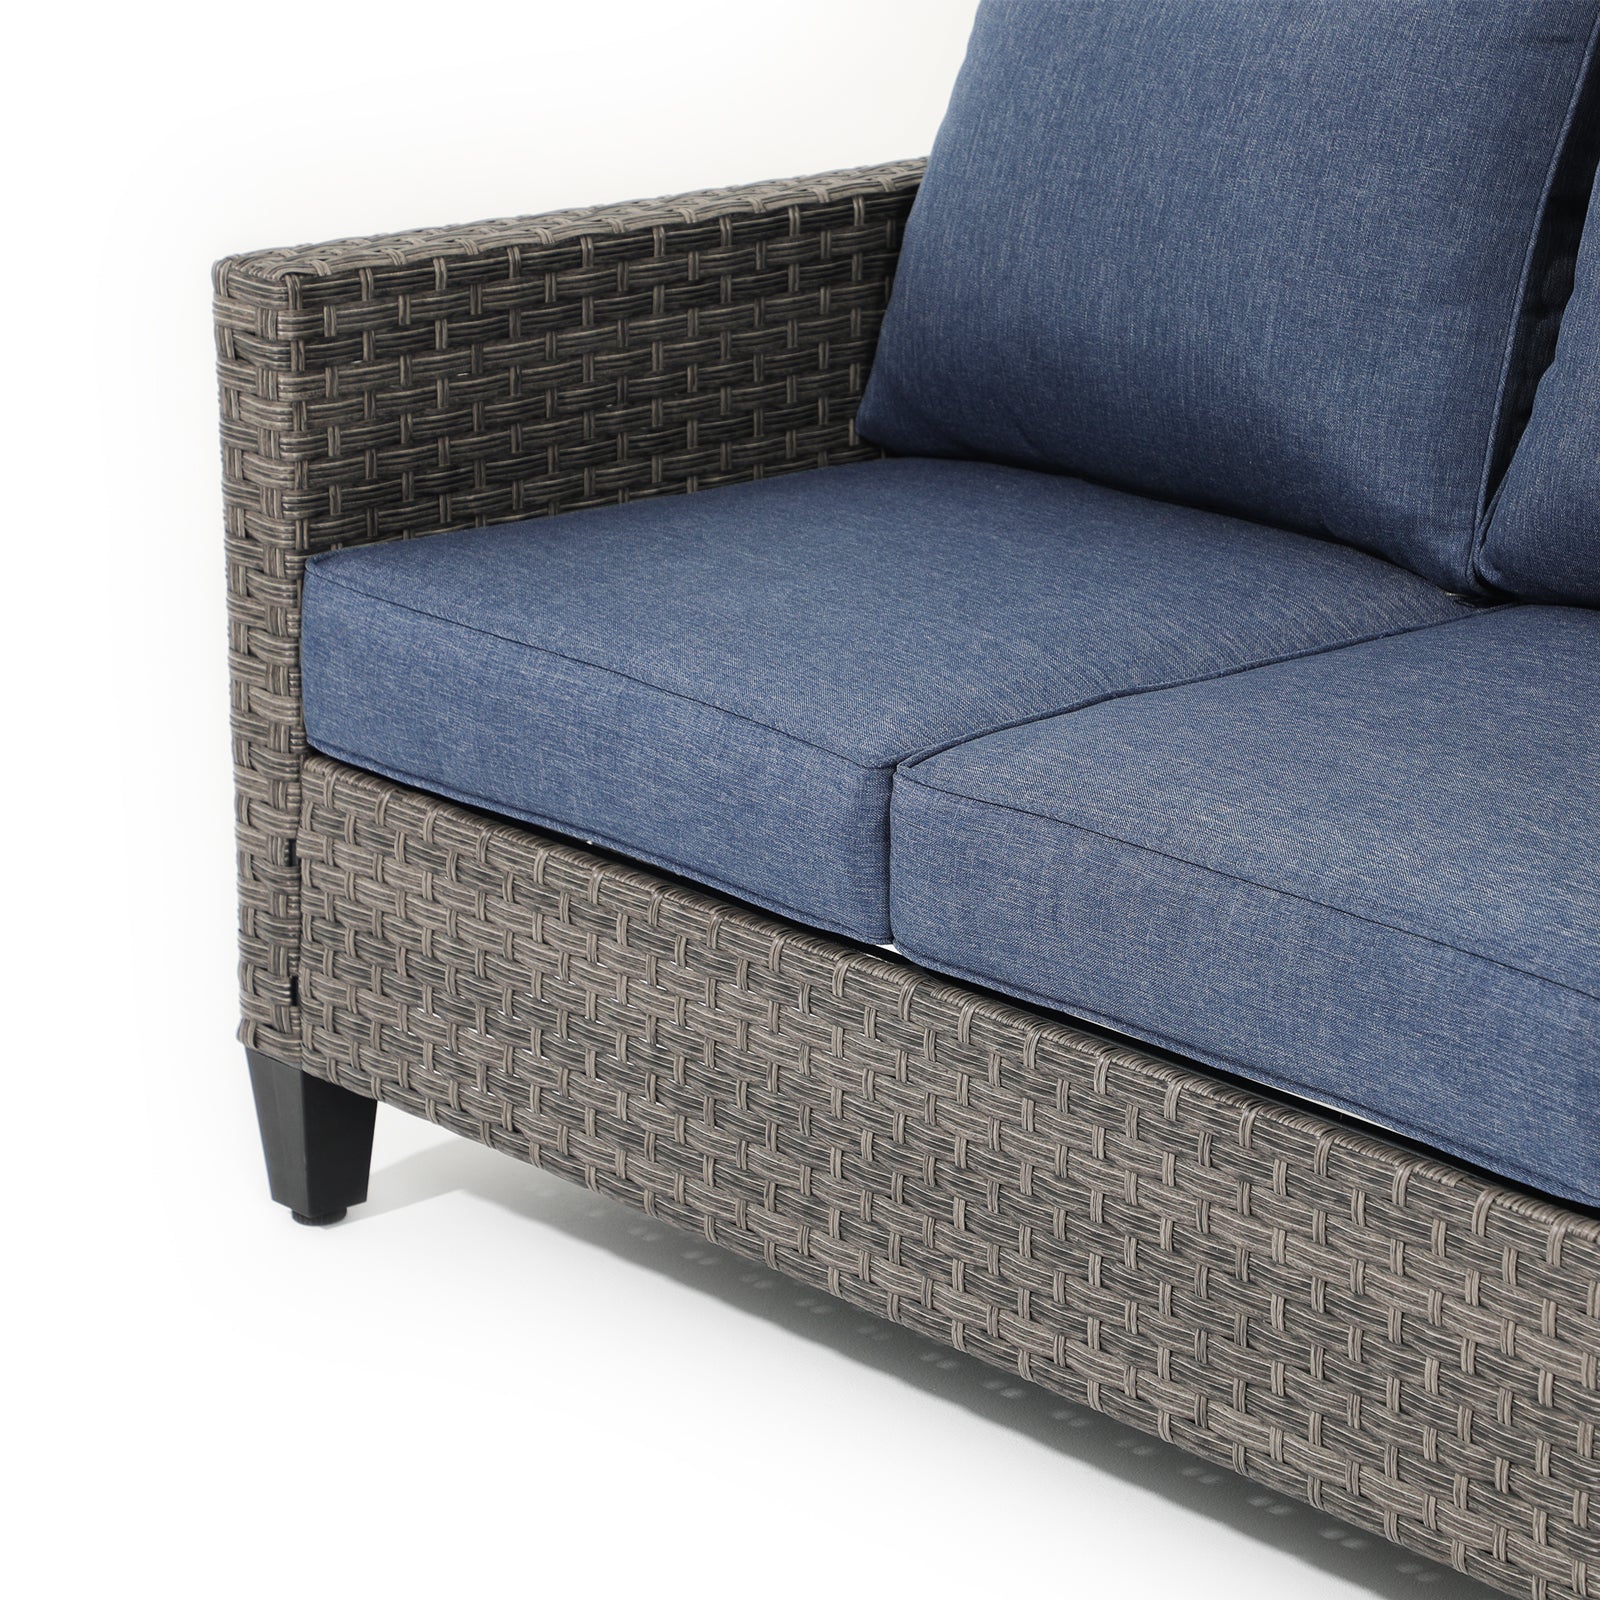 Ayia outdoor lounge chair, rattan design, blue cushion, detailed information - Jardina Furniture#color_Navy Blue